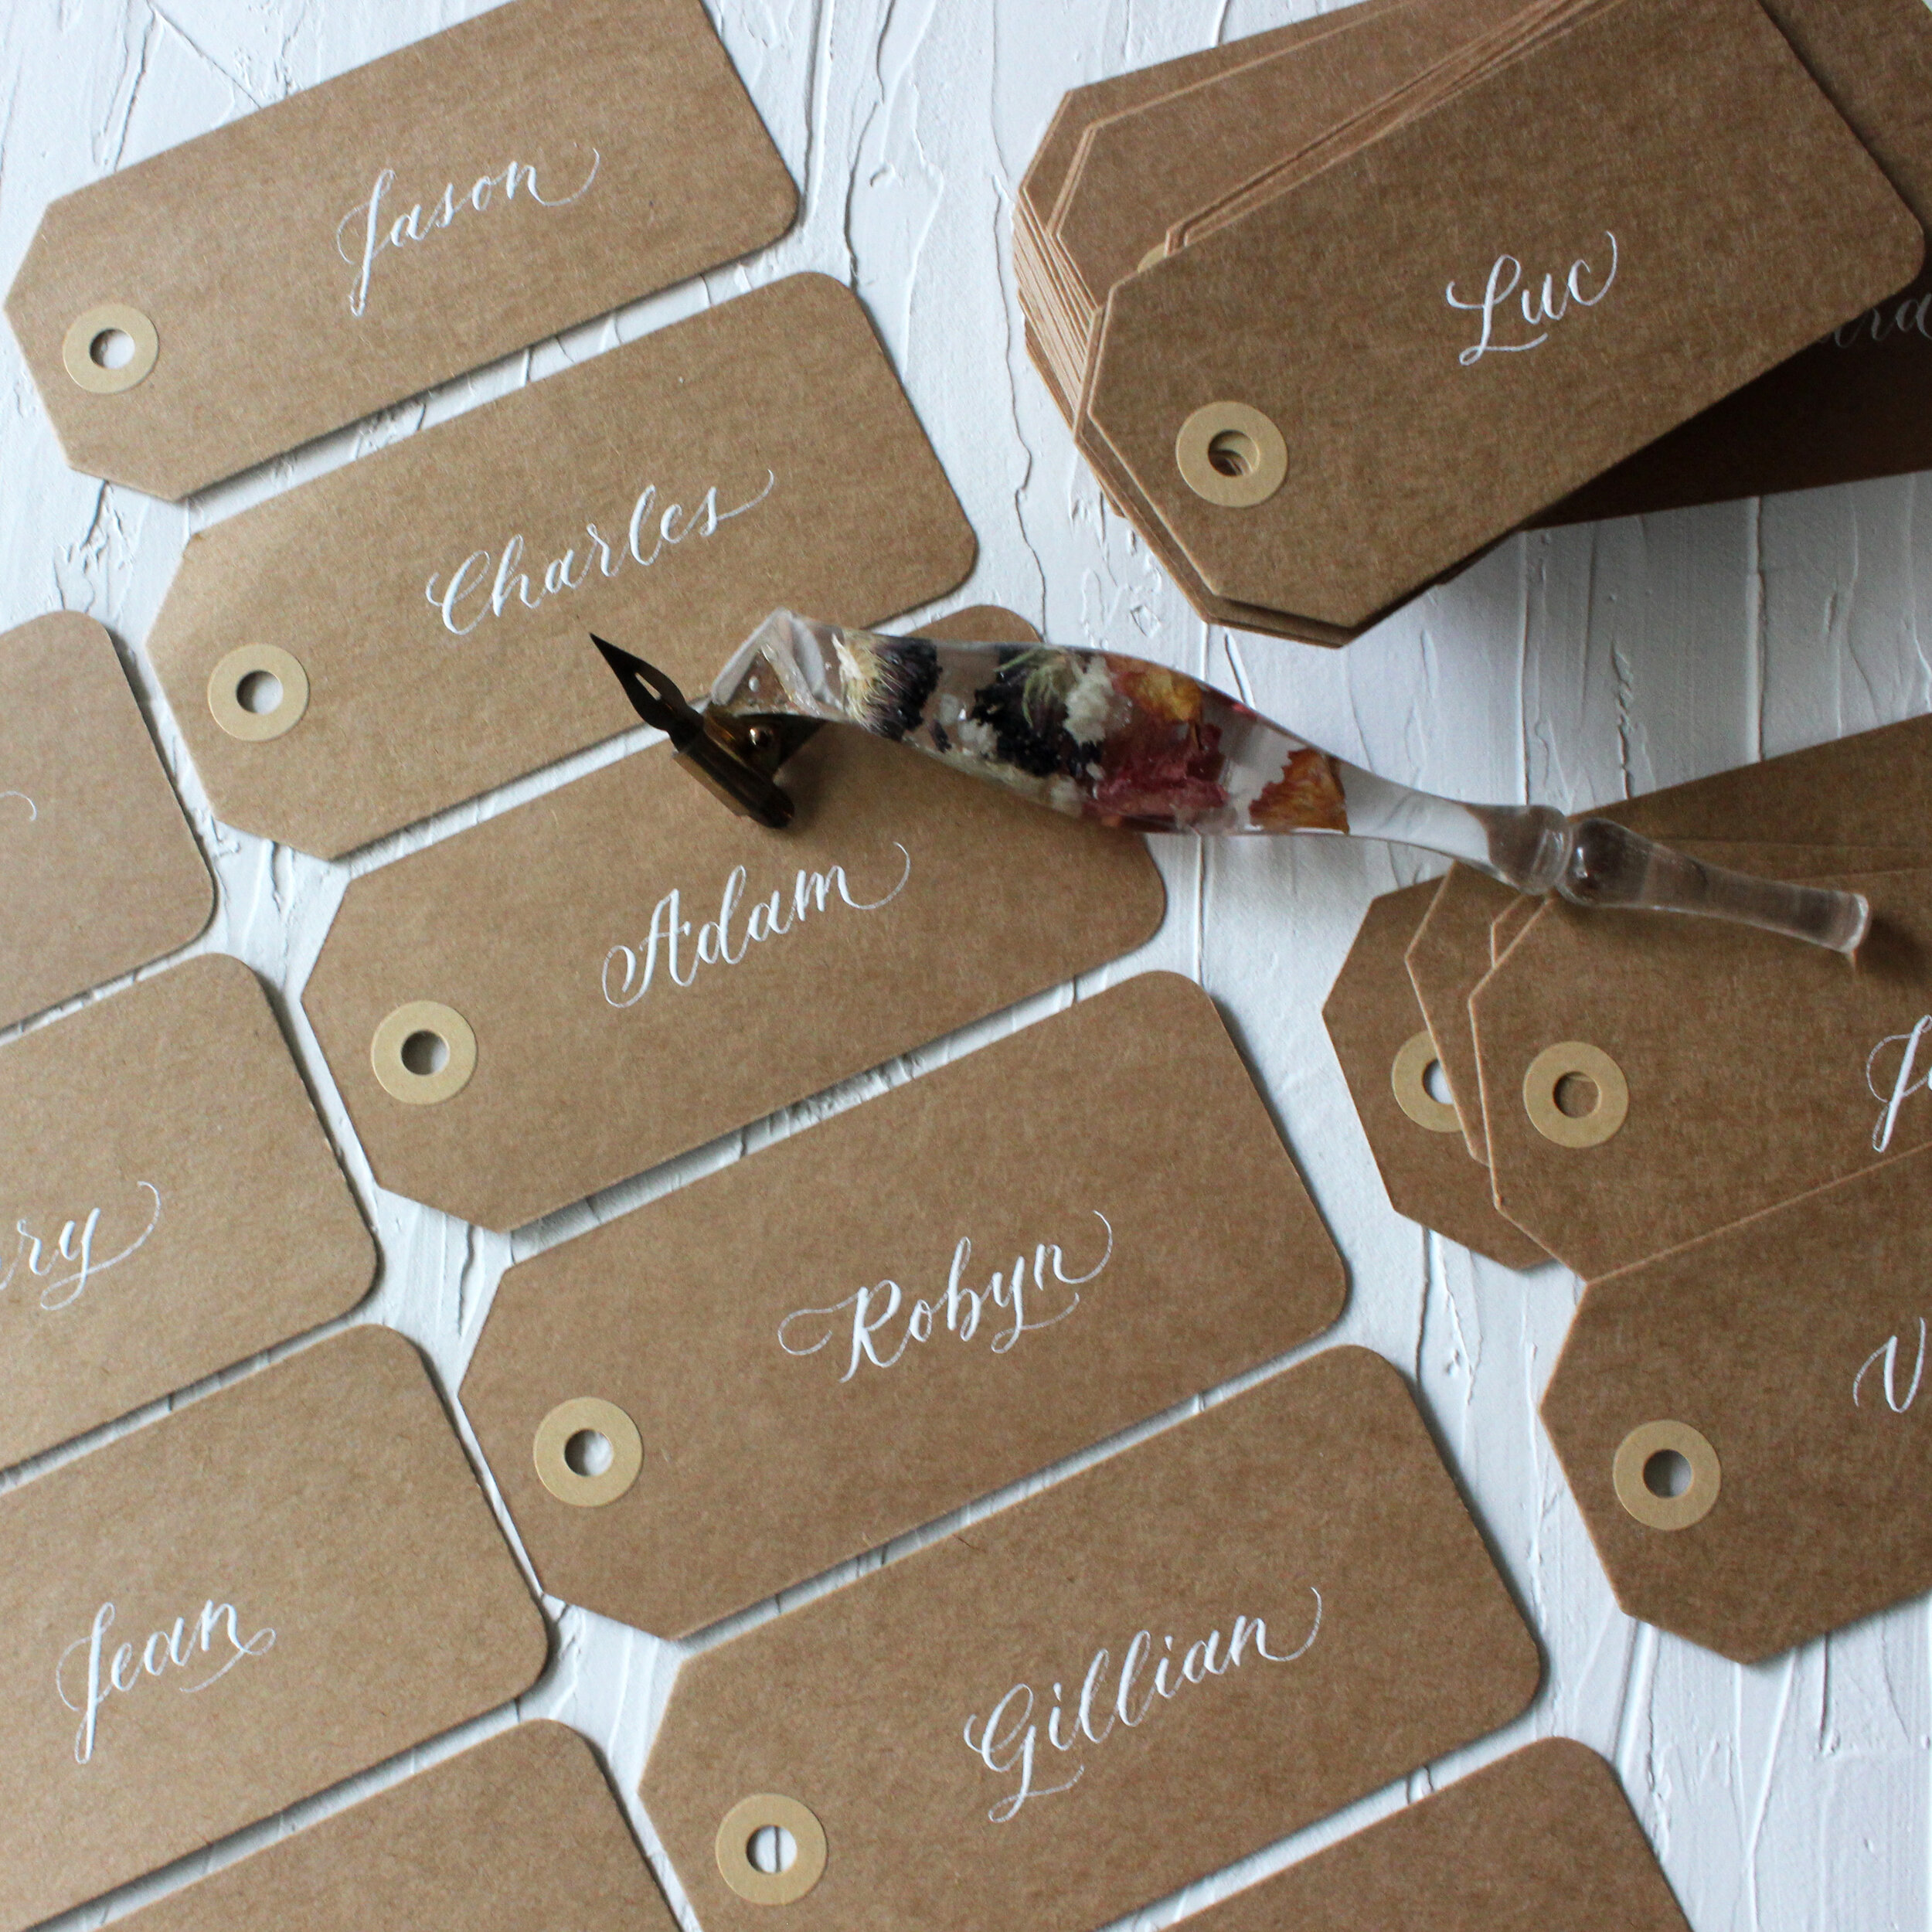 Custom calligraphy name tags for wedding guests